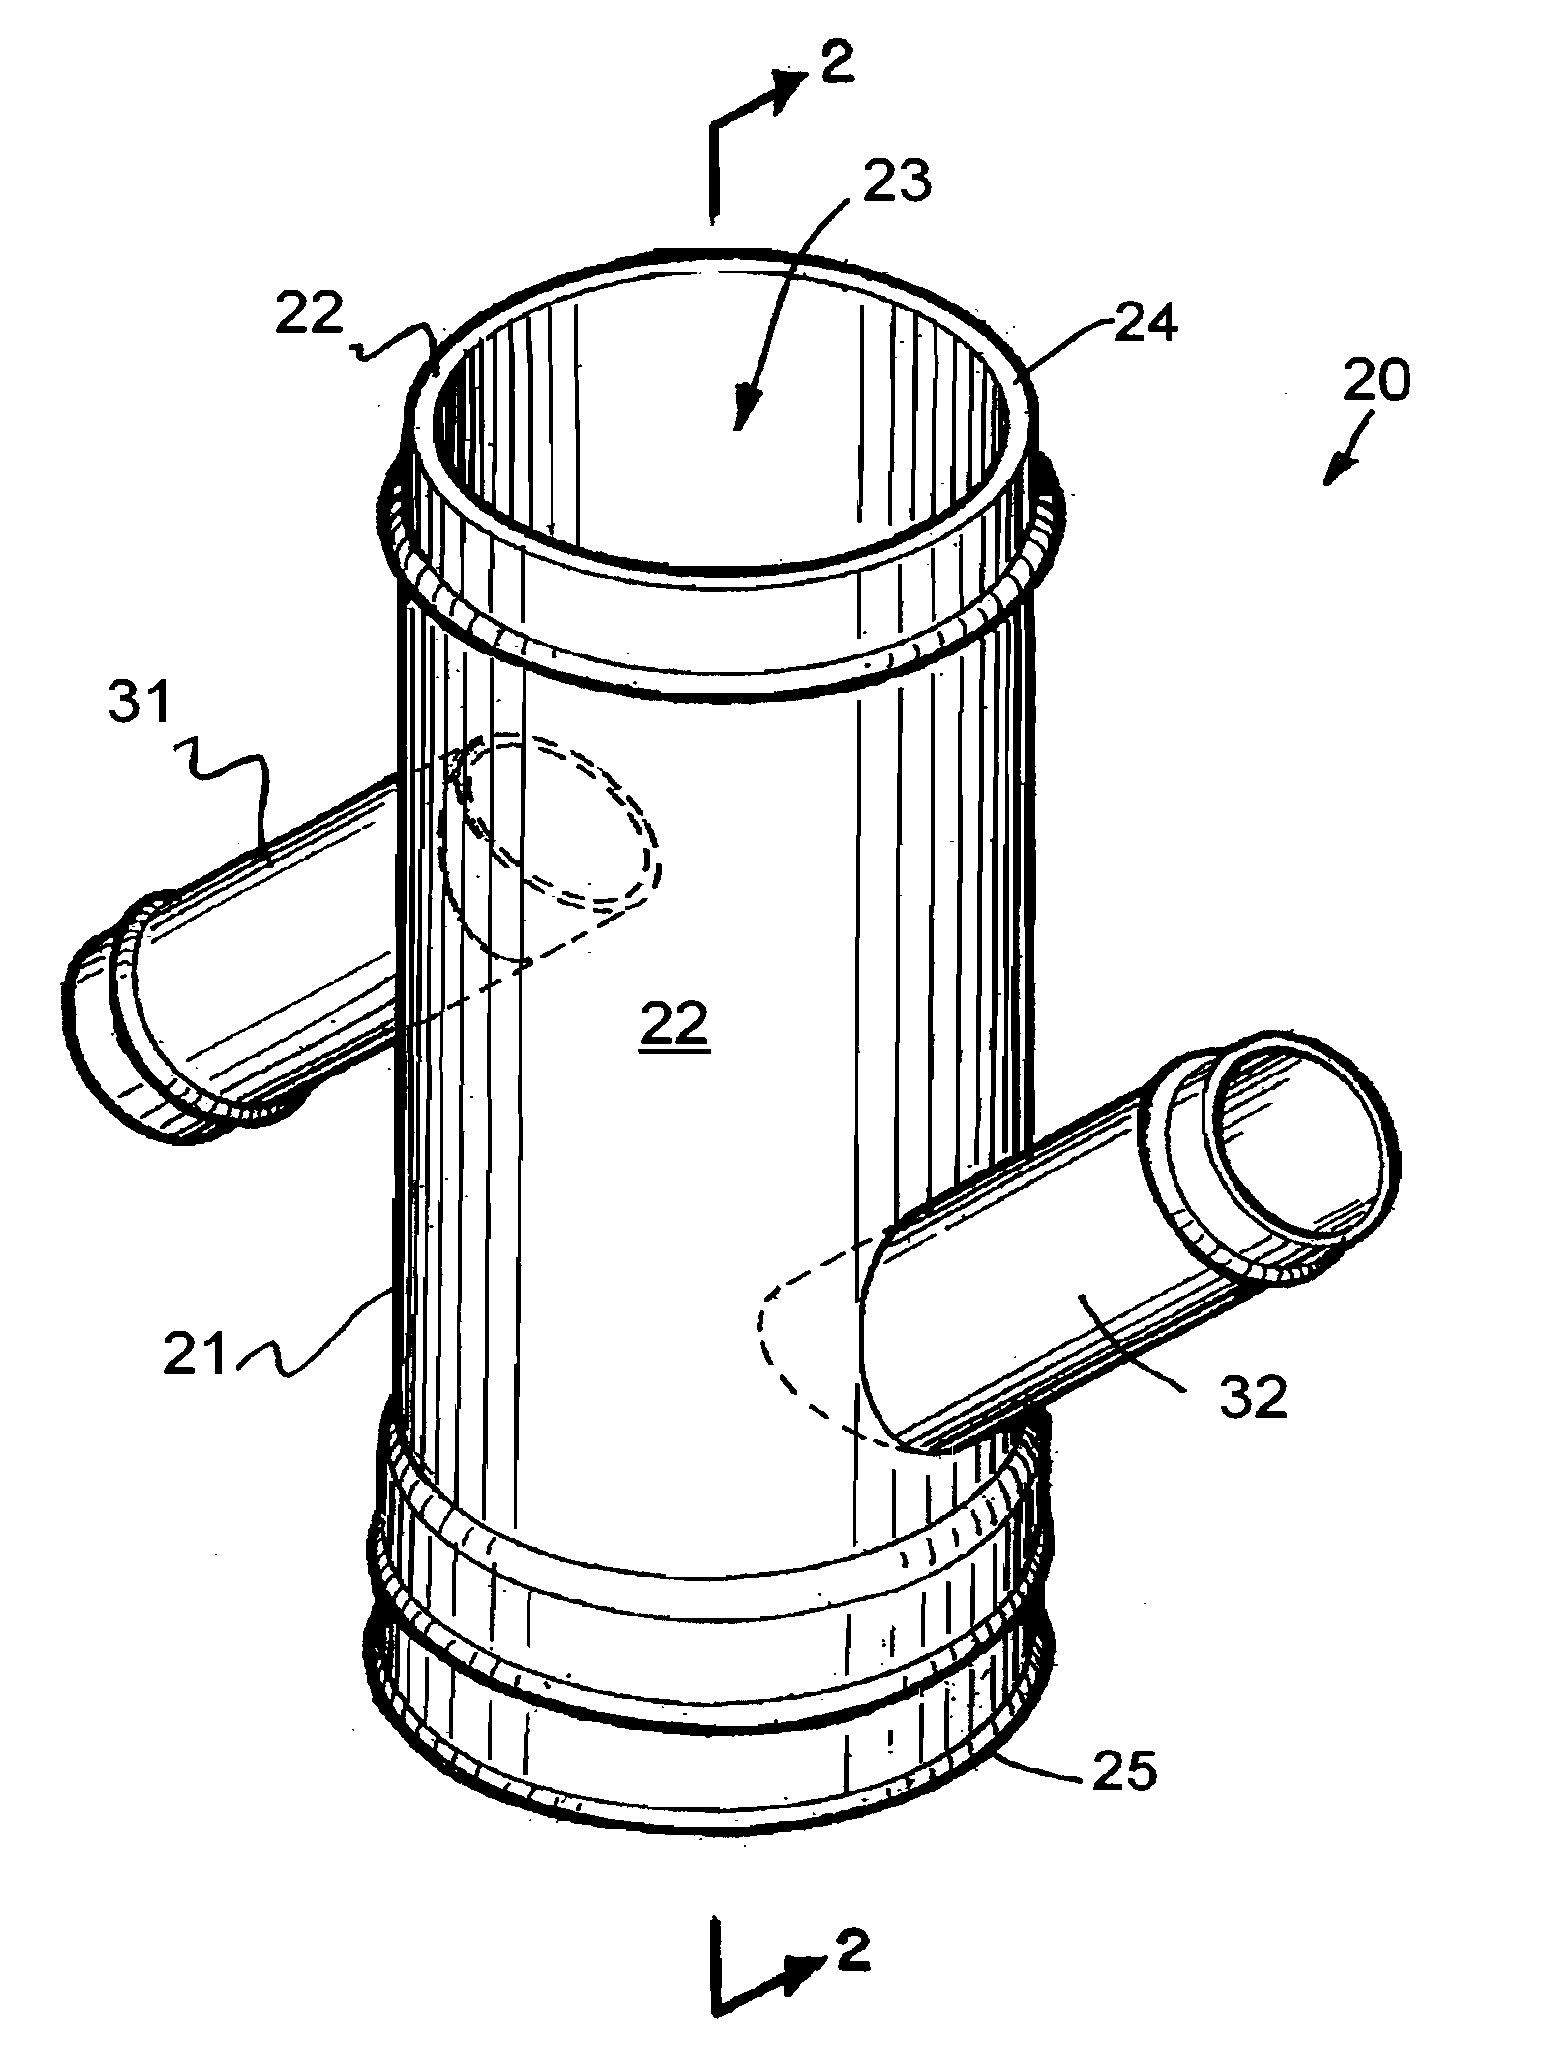 Water heating apparatus for continuous heated water flow and method for use in hydraulic fracturing